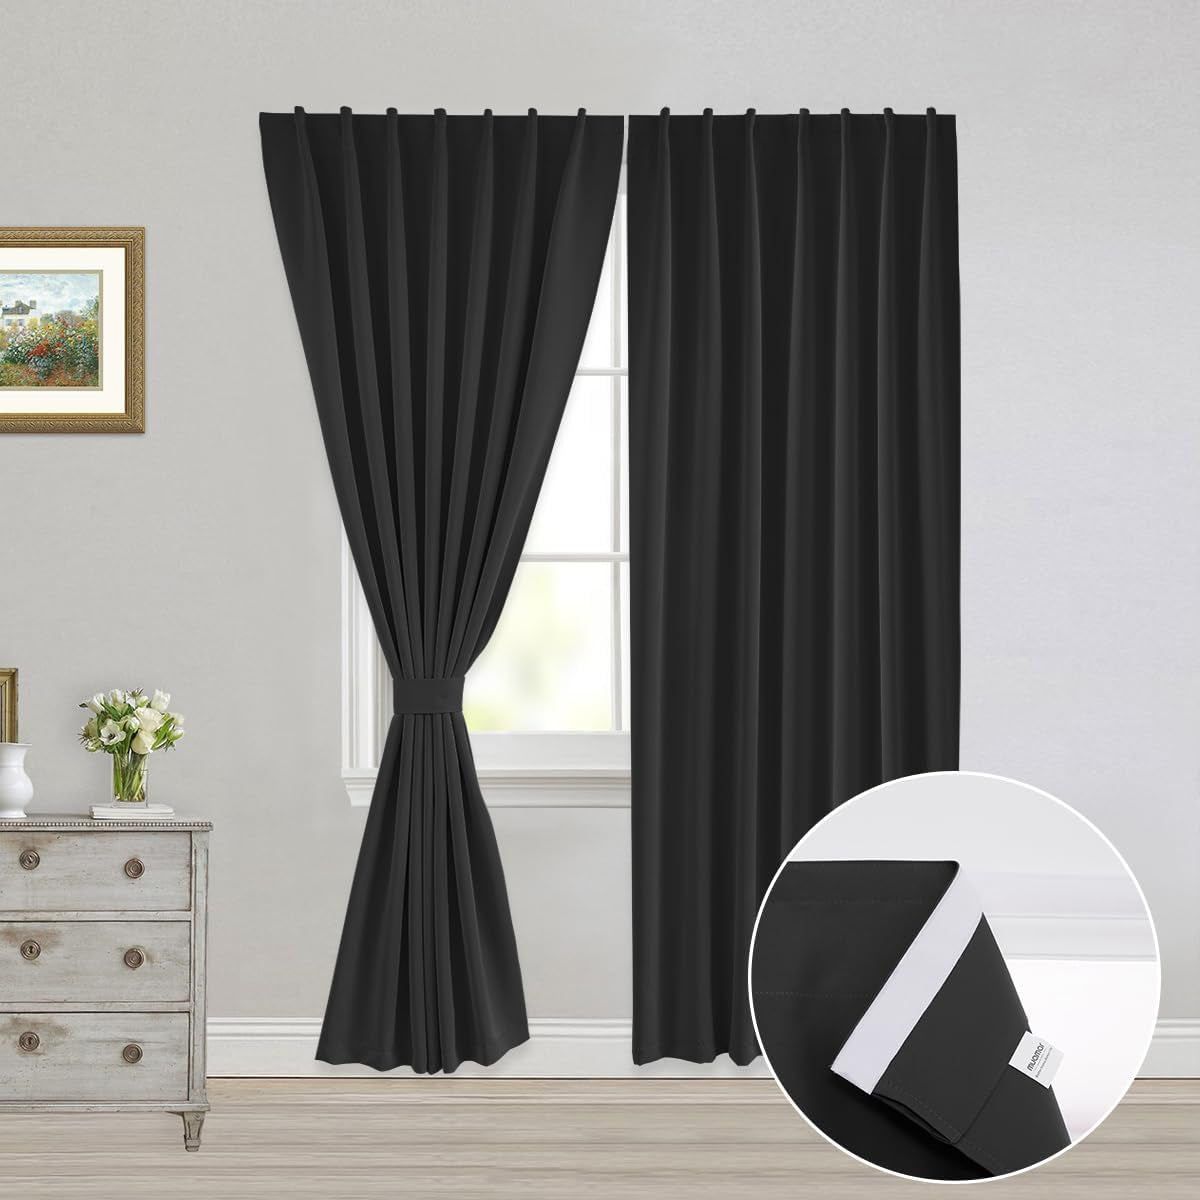 Muamar 2Pcs Blackout Curtains Privacy Curtains 63 Inch Length Window Curtains,Easy Install Thermal Insulated Window Shades,Stick Curtains No Rods, Black 42" W X 63" L  Muamar Black 42"W X 84"L 